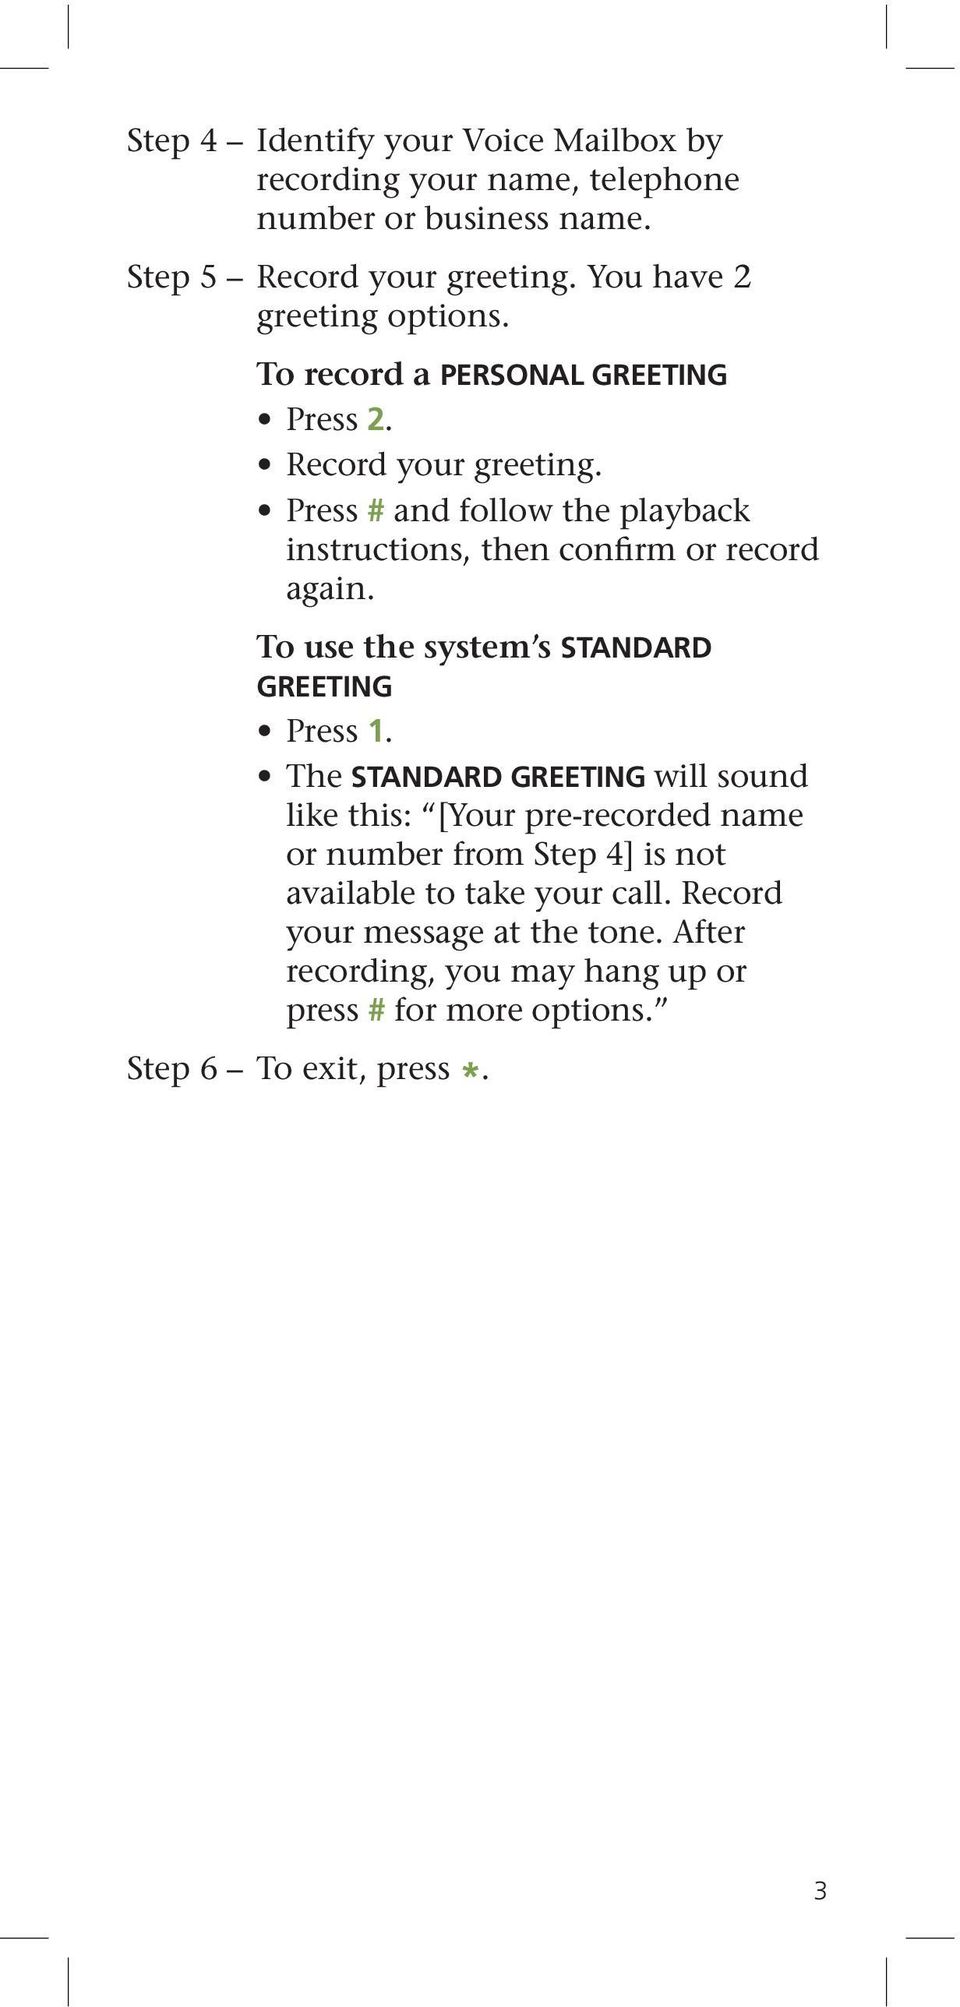 Press # and follow the playback instructions, then confirm or record again. To use the system s STANDARD GREETING Press 1.